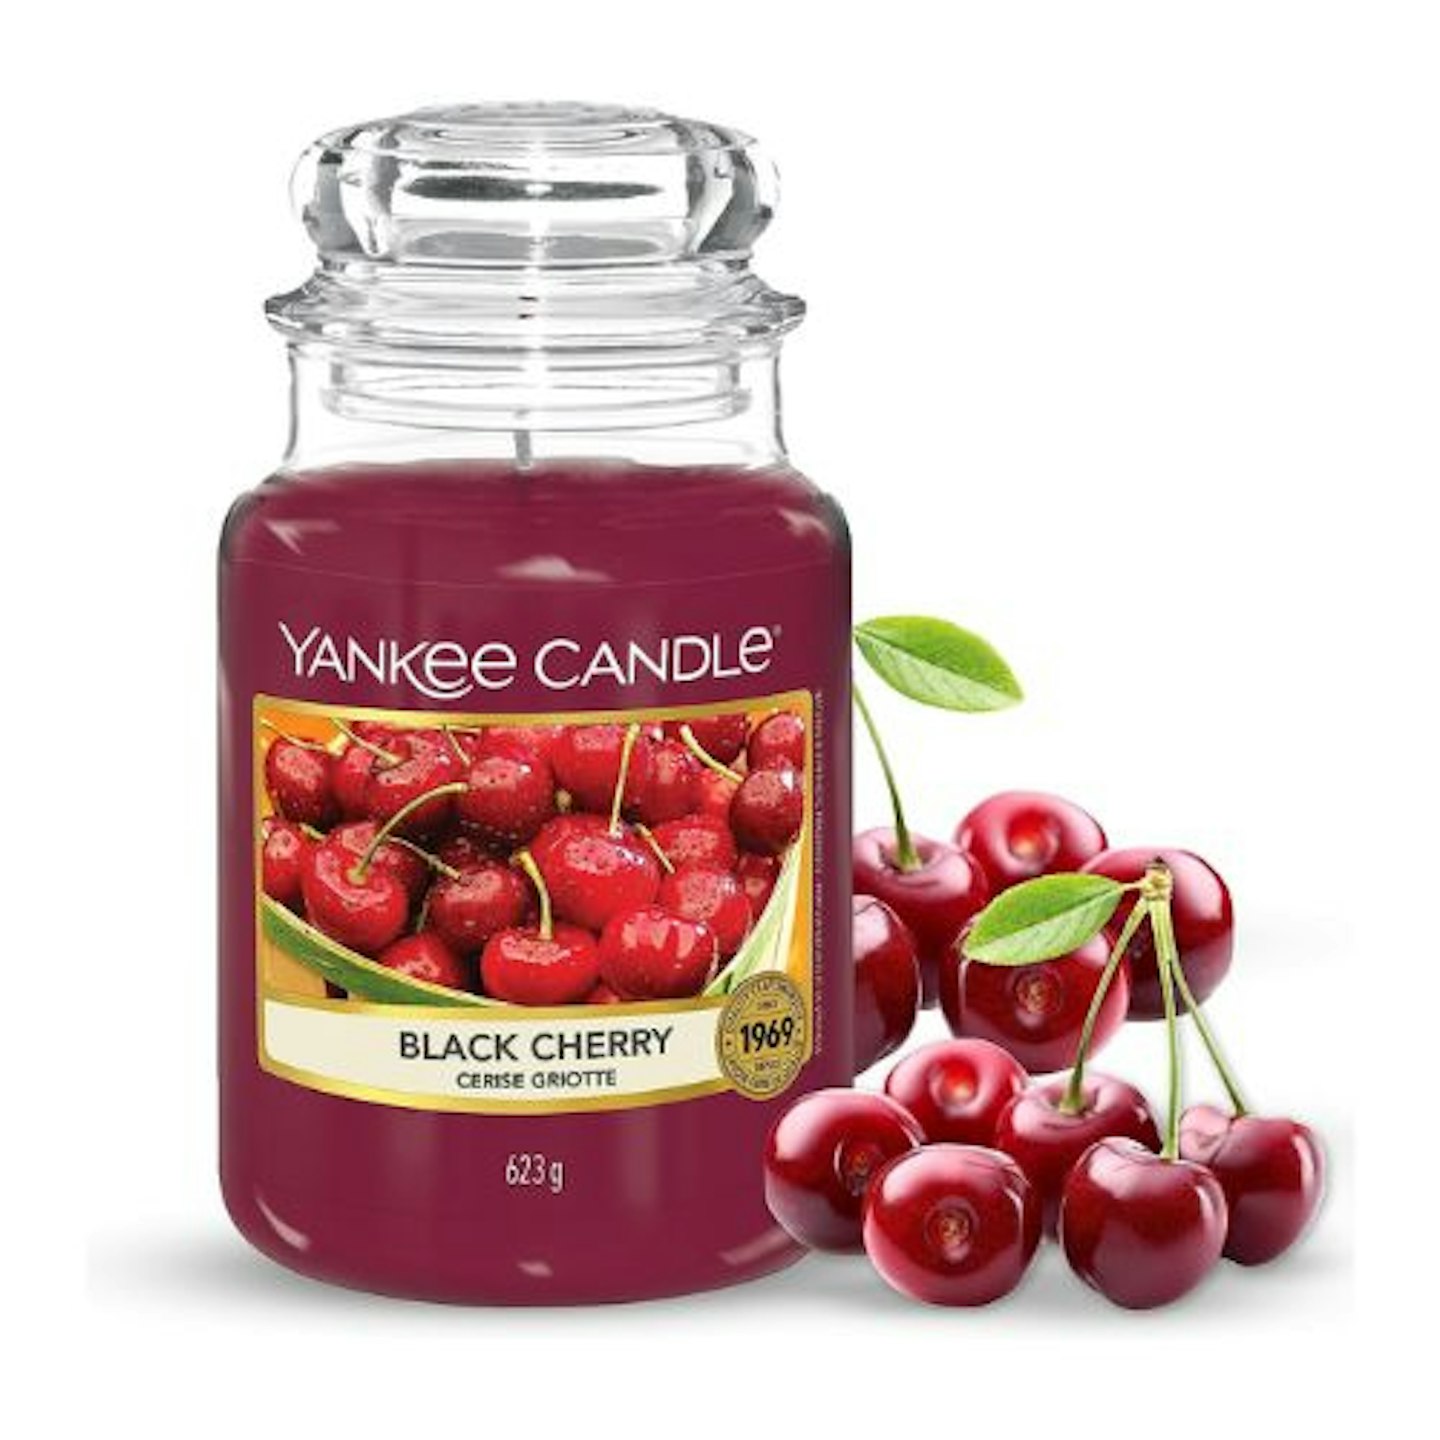  Yankee Candle Scented Candle | Black Cherry Large Jar Candle